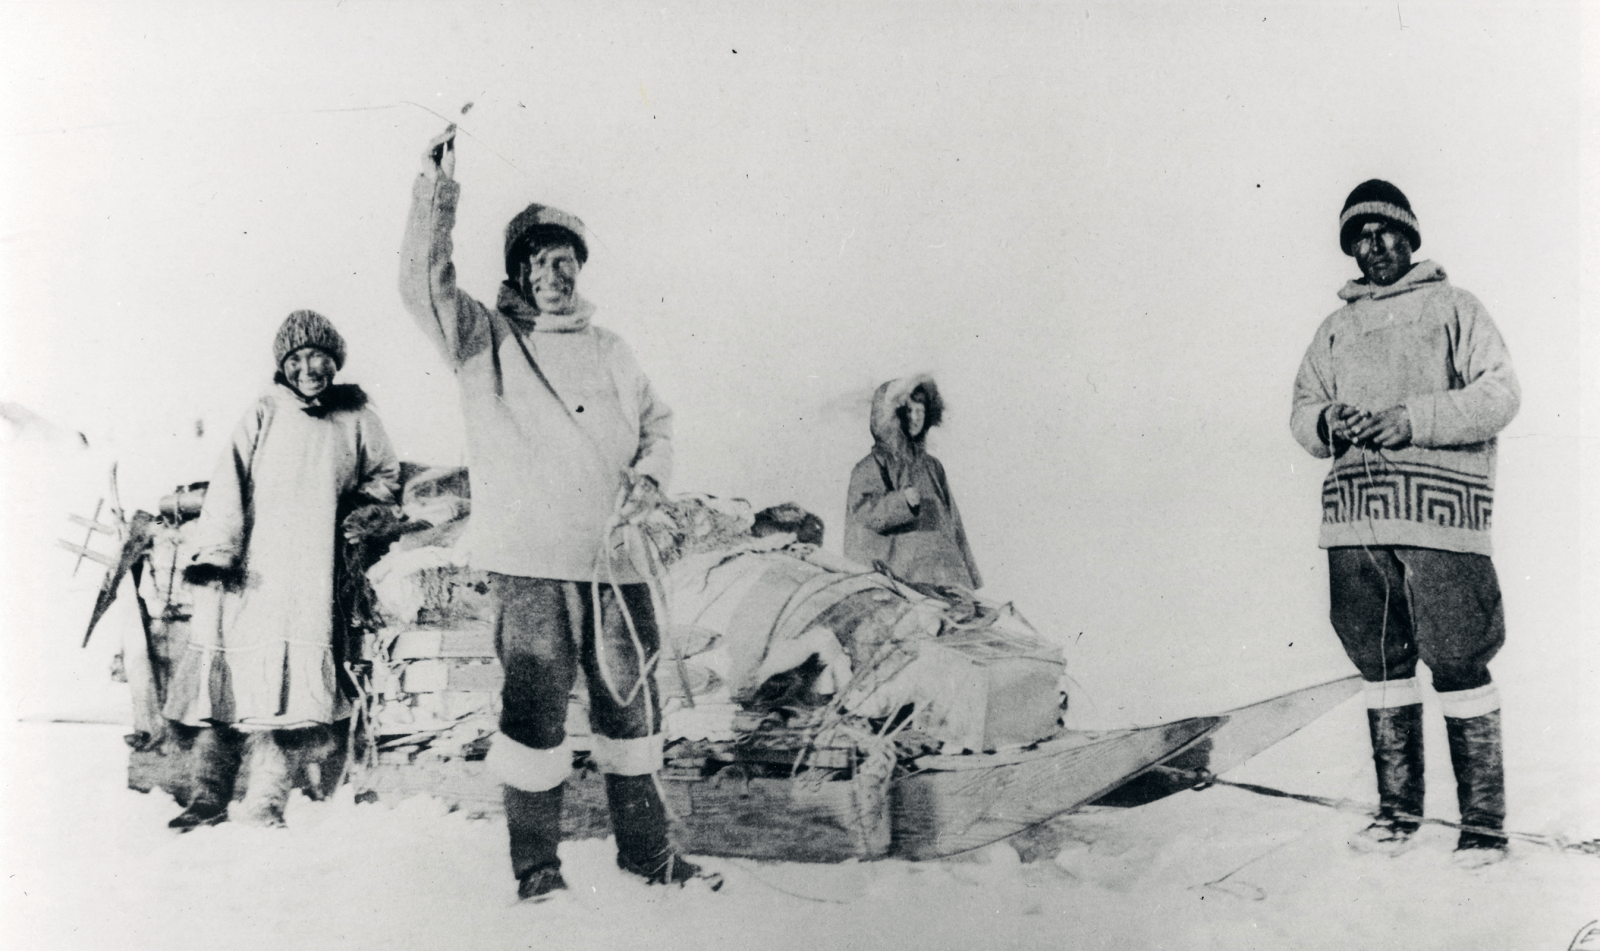 The Fifth Thule Expedition, (from left) Arnarulunnguaq Peary, Knud Rasmussen, an unknown man, and Qaavigarssuaq Miteq Ijaja Kristiansen. Photo: The House of Knud Rasmussen & Industrimuseet Frederiks Værk archive.